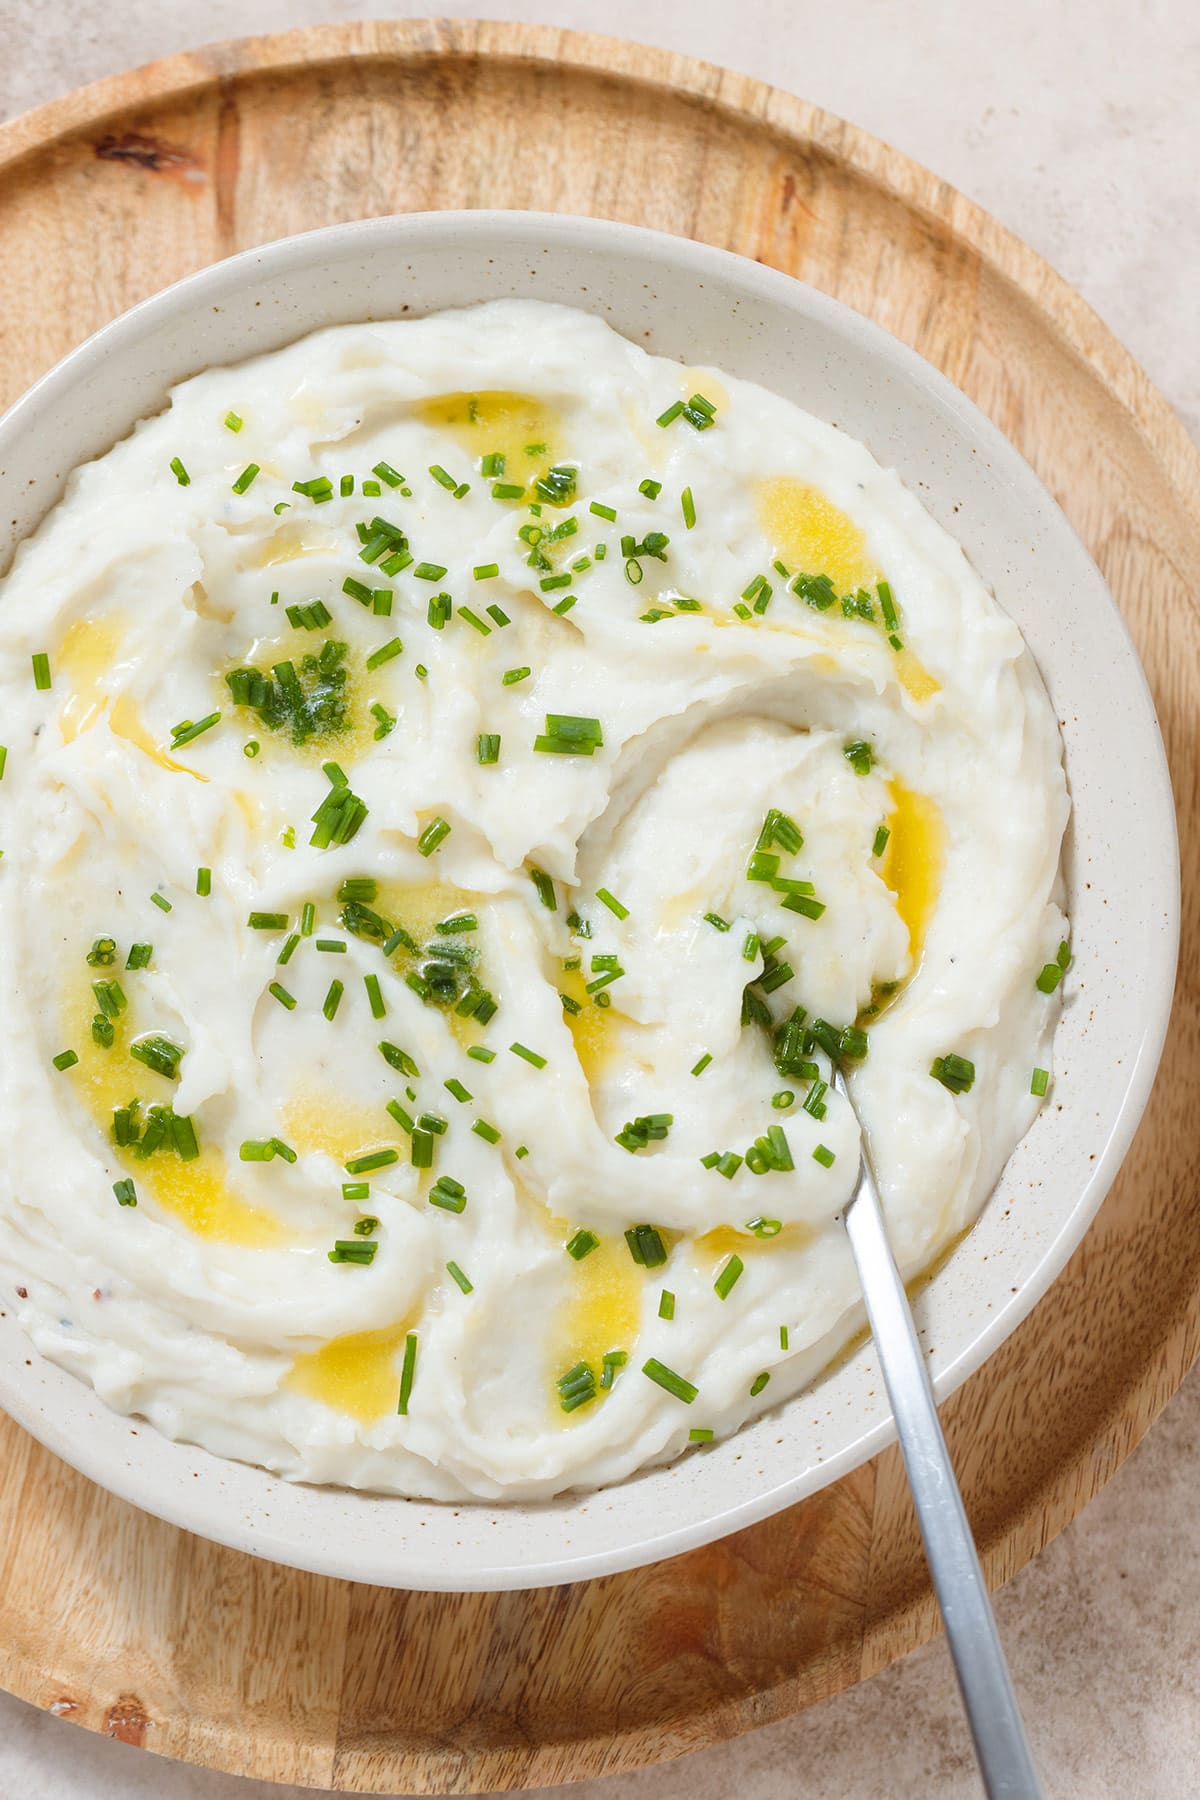 Whipped mashed potatoes topped with melted butter and chopped fresh chives in a beige bowl on a wooden serving plate with a silver spoon inserted on the right.